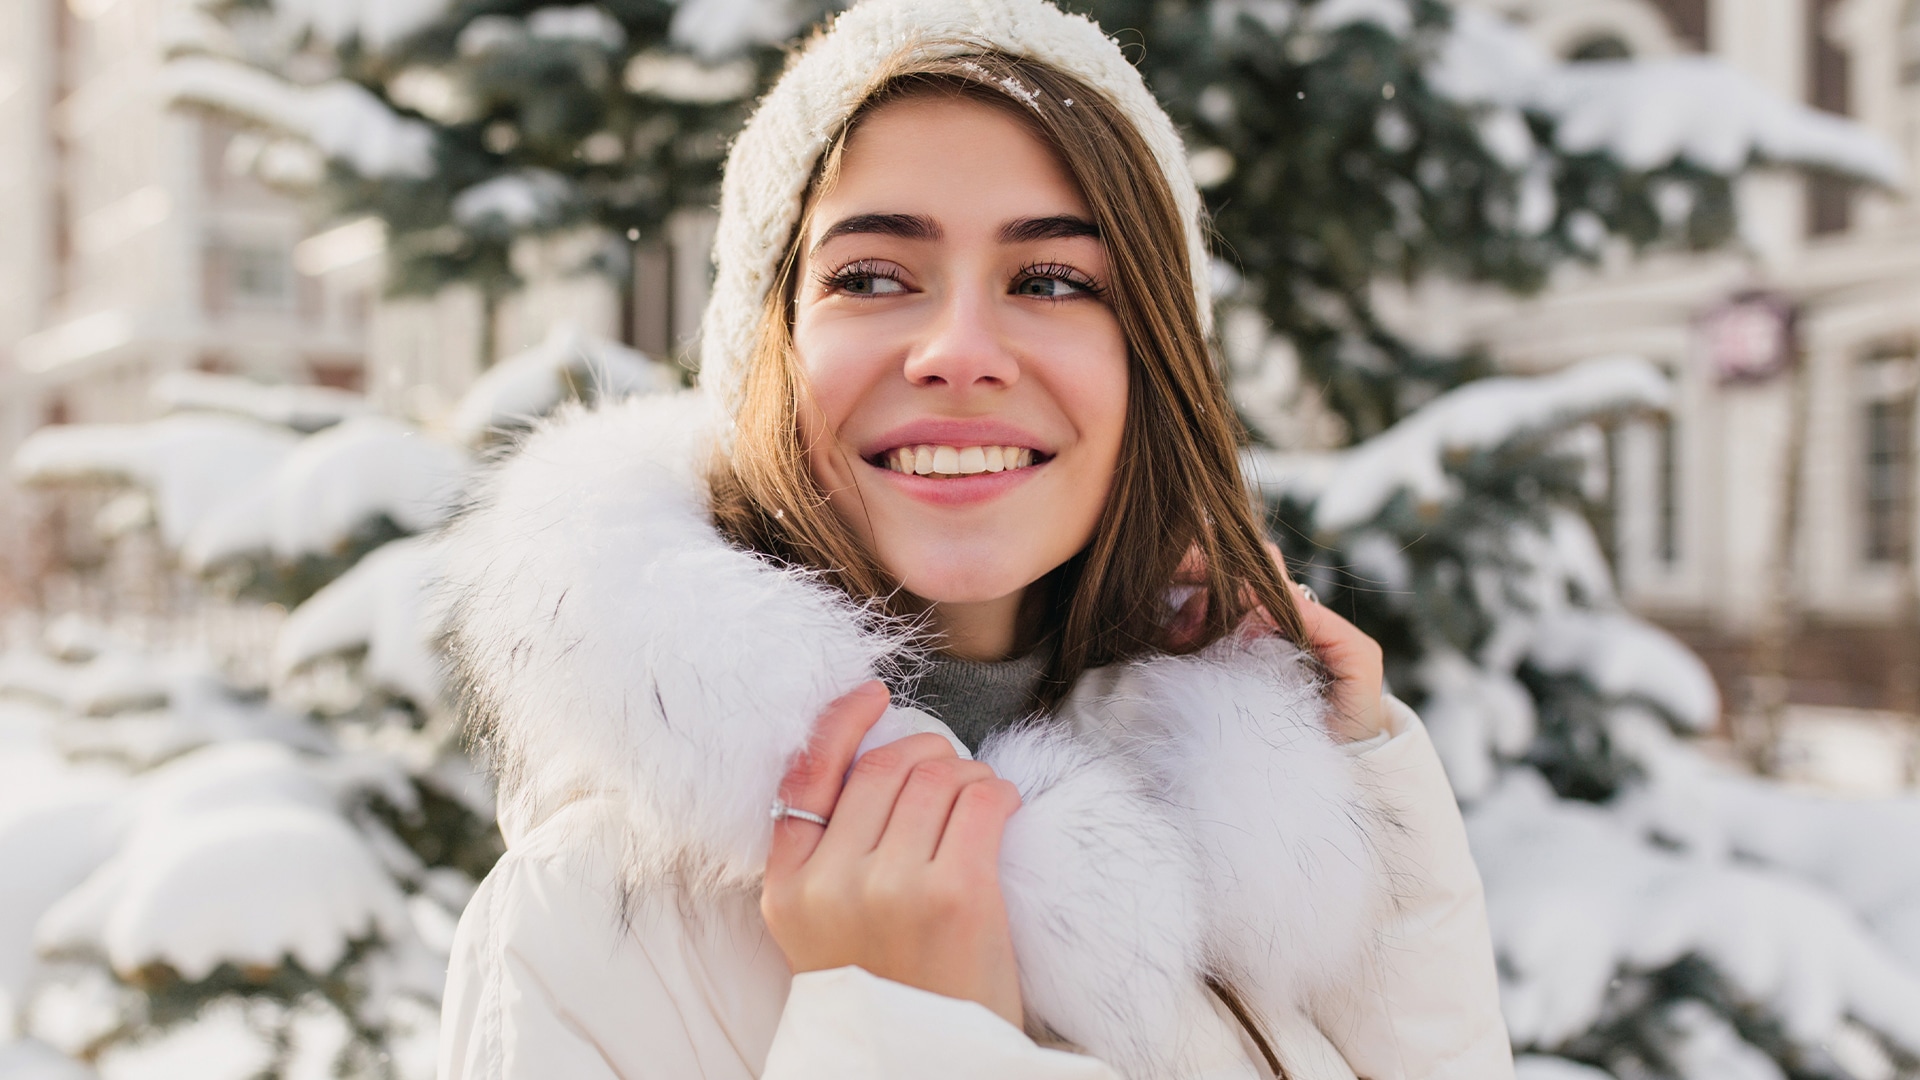 Woman wearing white winter wear smiling in front of a backdrop of snowy trees